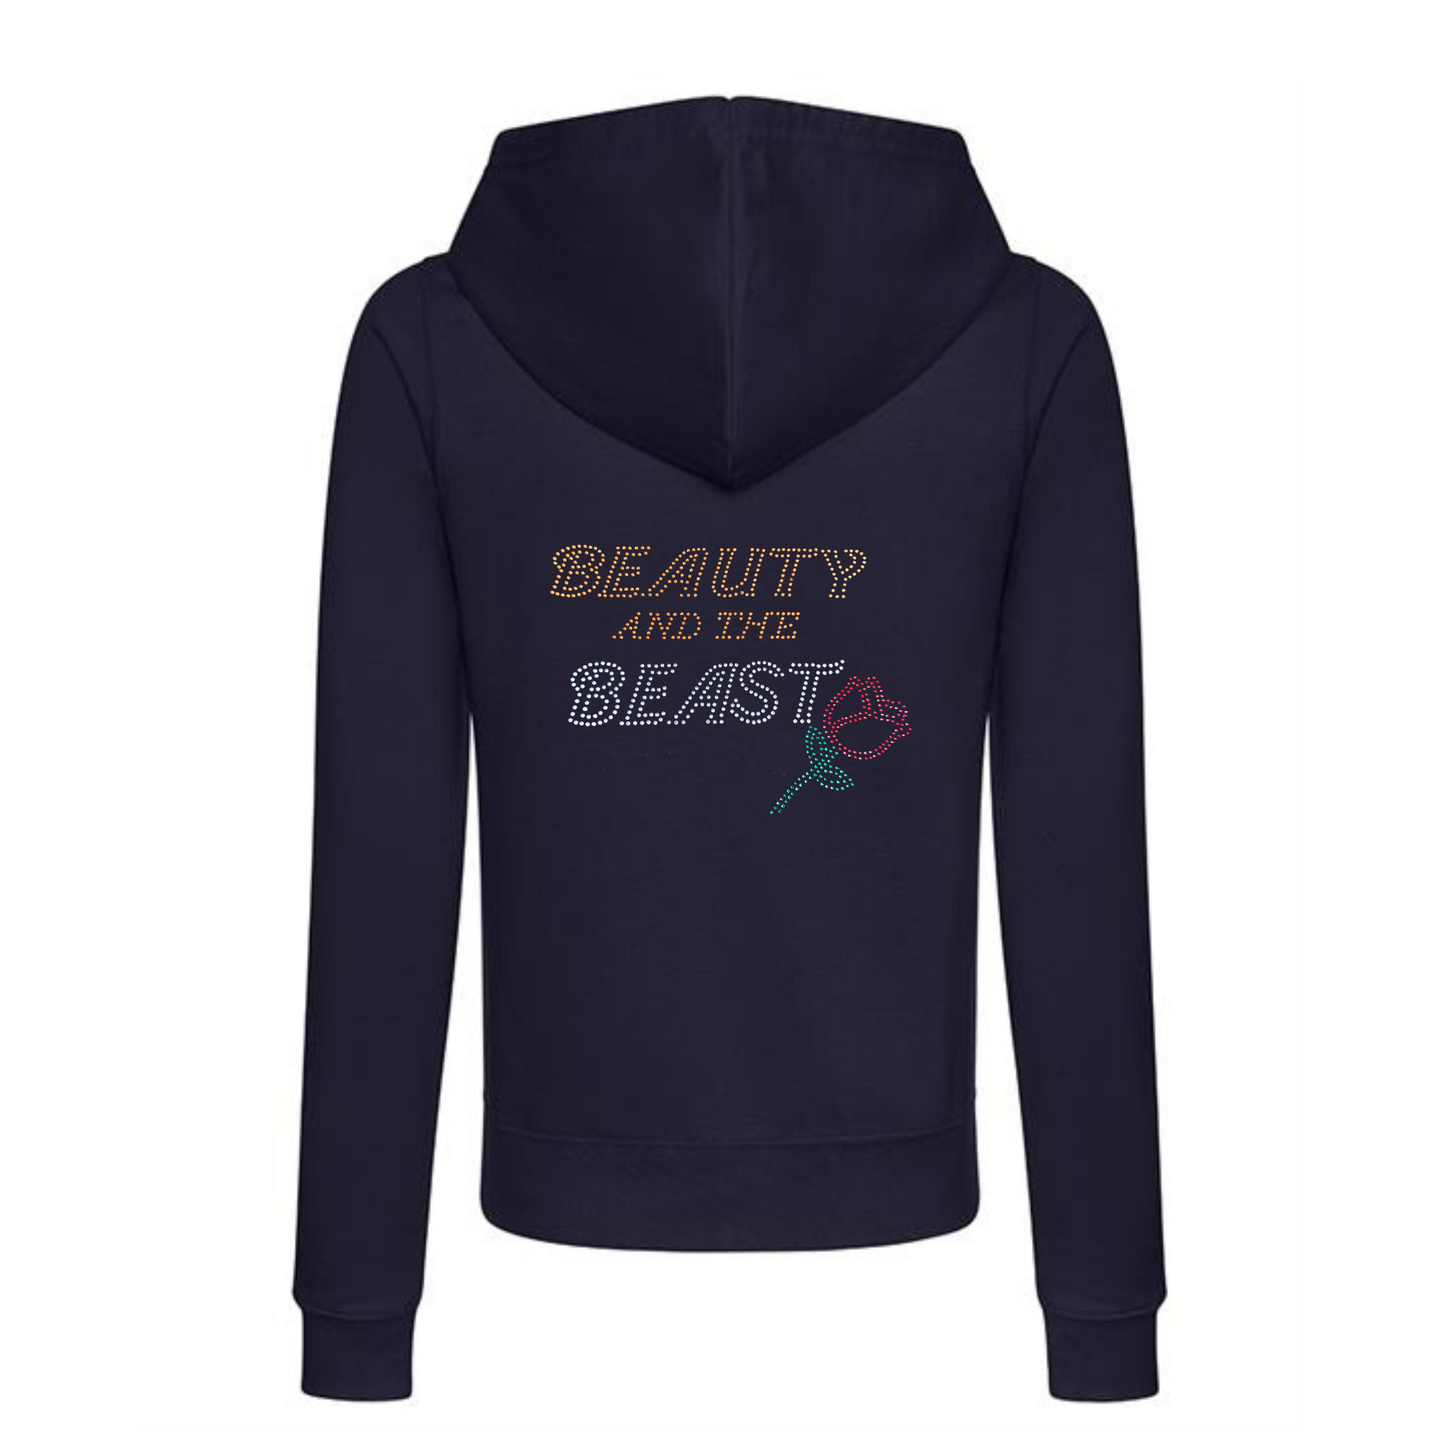 Beauty and the Beast Double design Zipped Hoodie adult